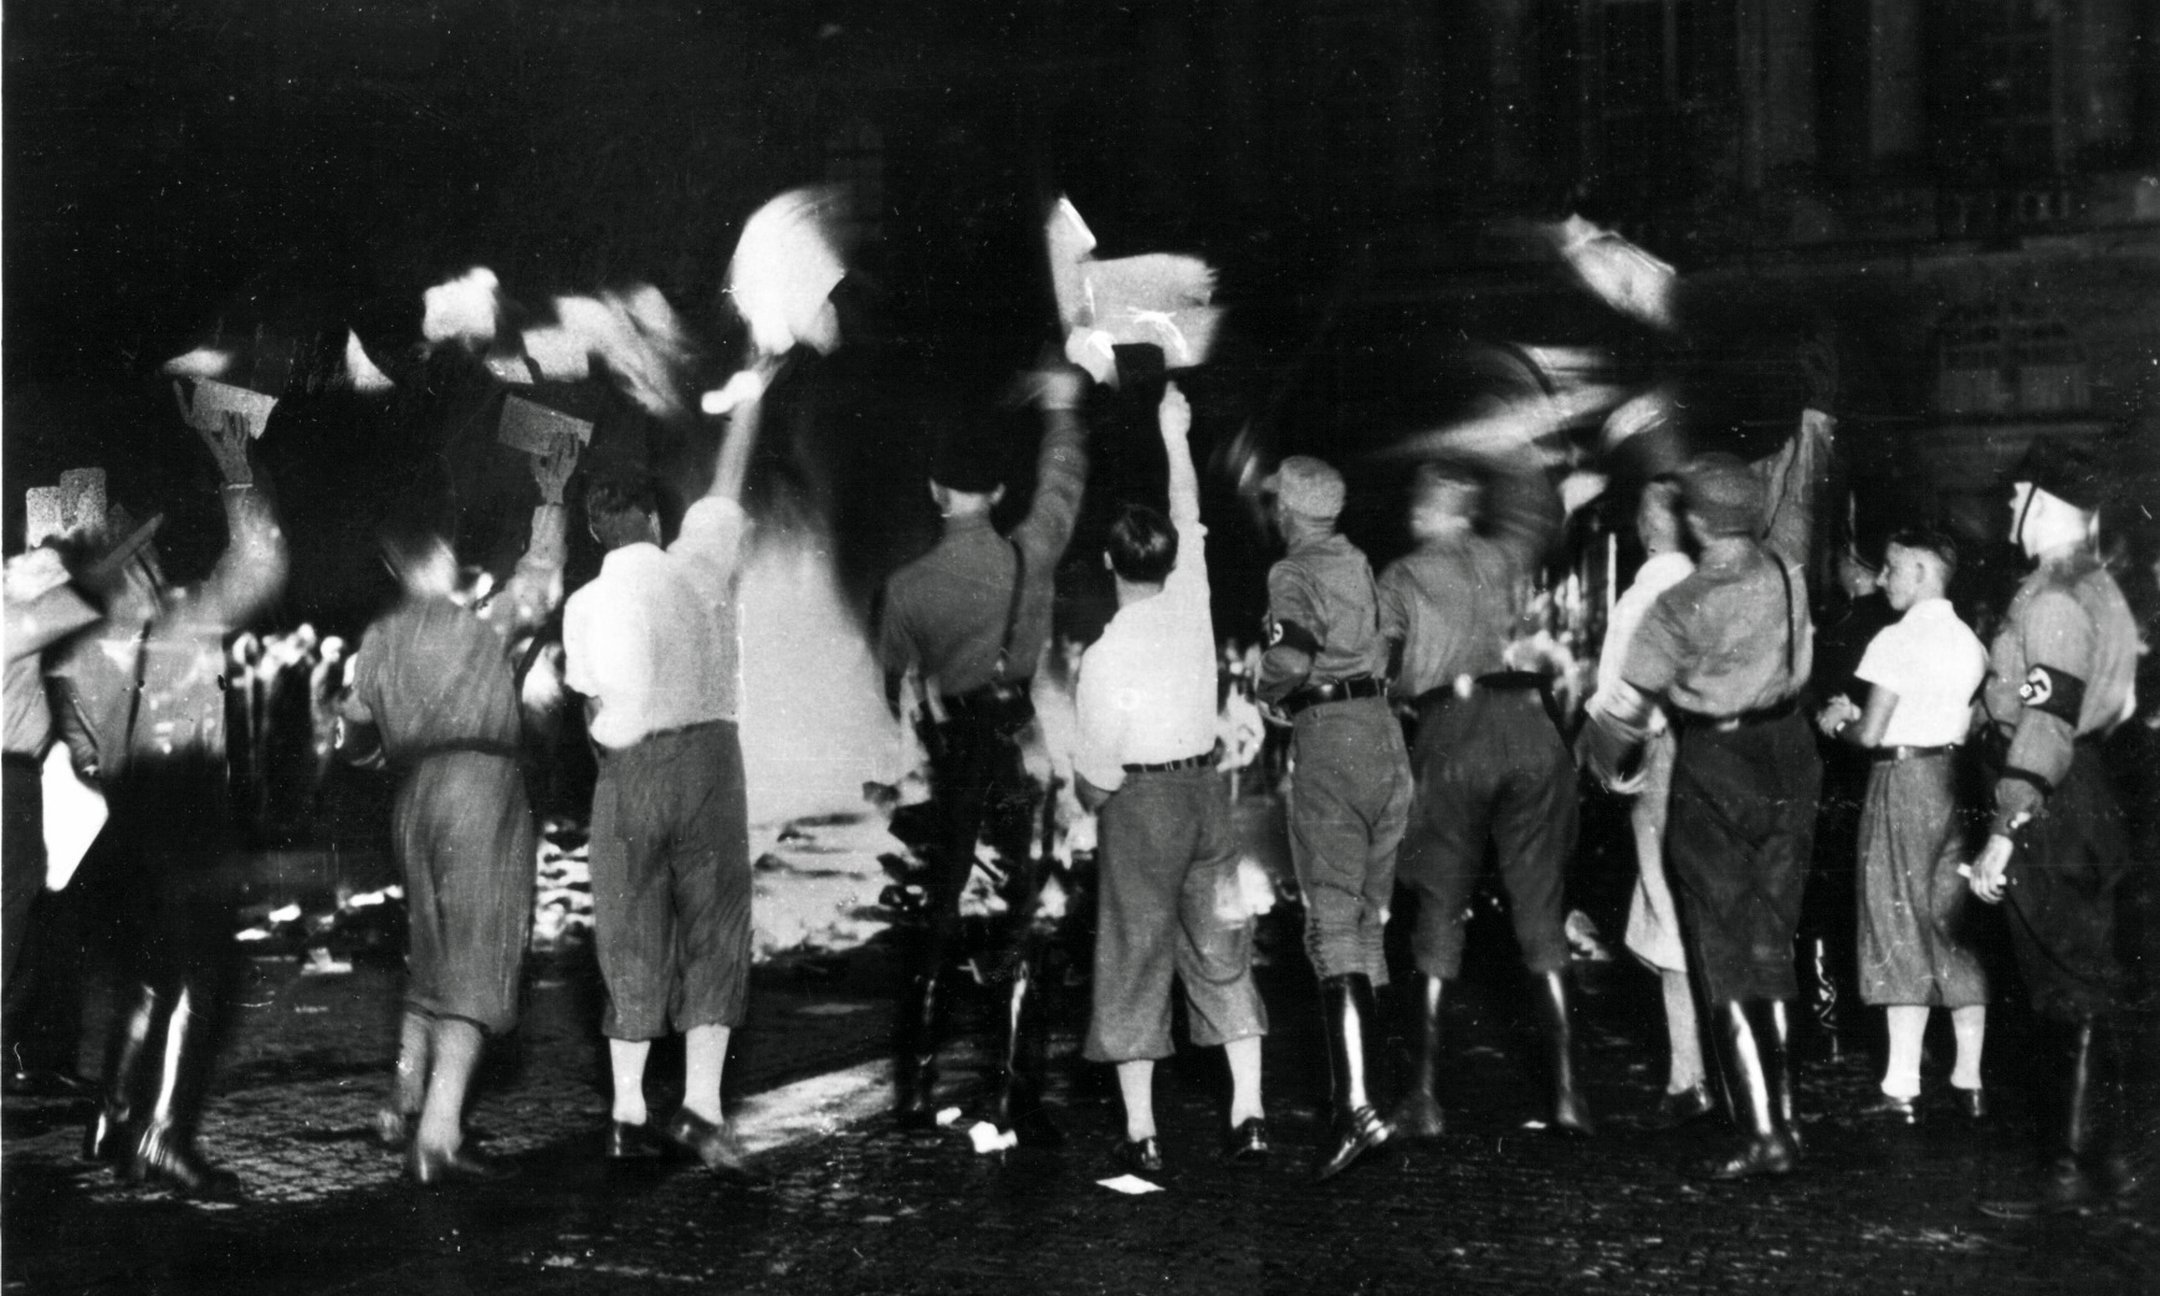 On 10 May 1933, students burn 'un-German' books on Opernplatz in Berlin. In other univerisity cities, students also burn books by writers like Karl Marx, Sigmund Freud and Erich Maria Remarque.